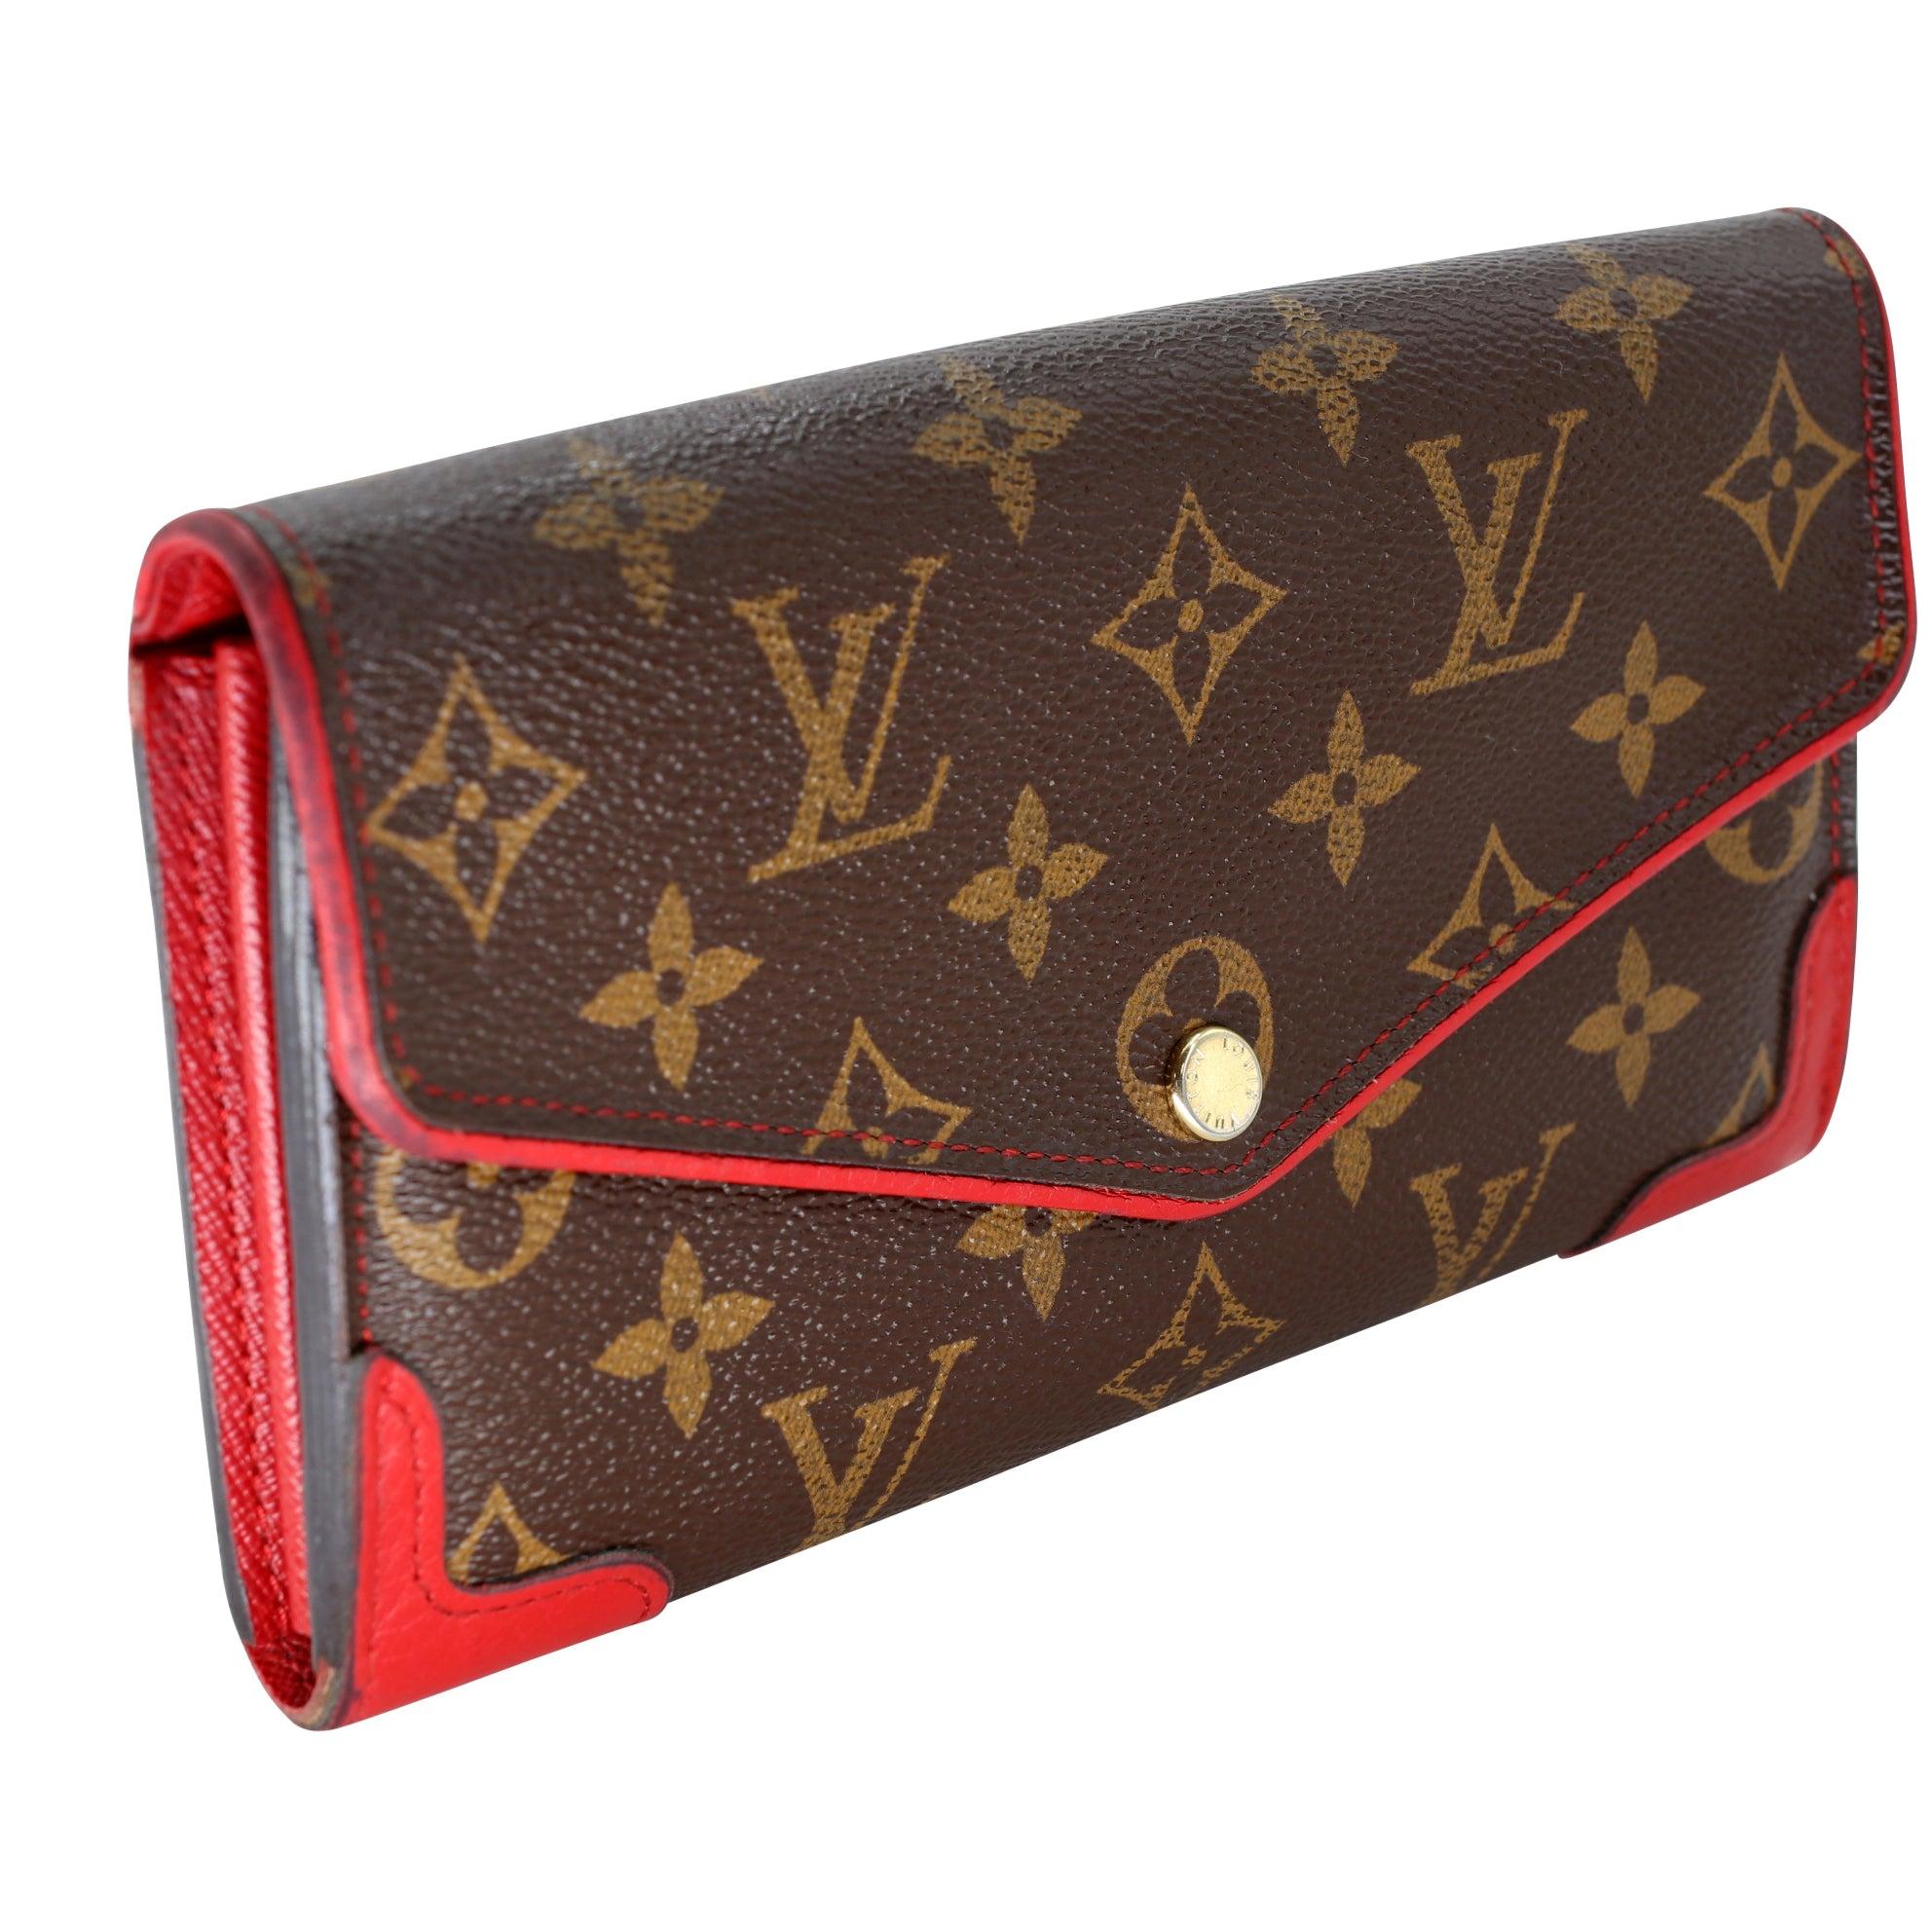 J1 Louis Vuitton - For Sale on 1stDibs